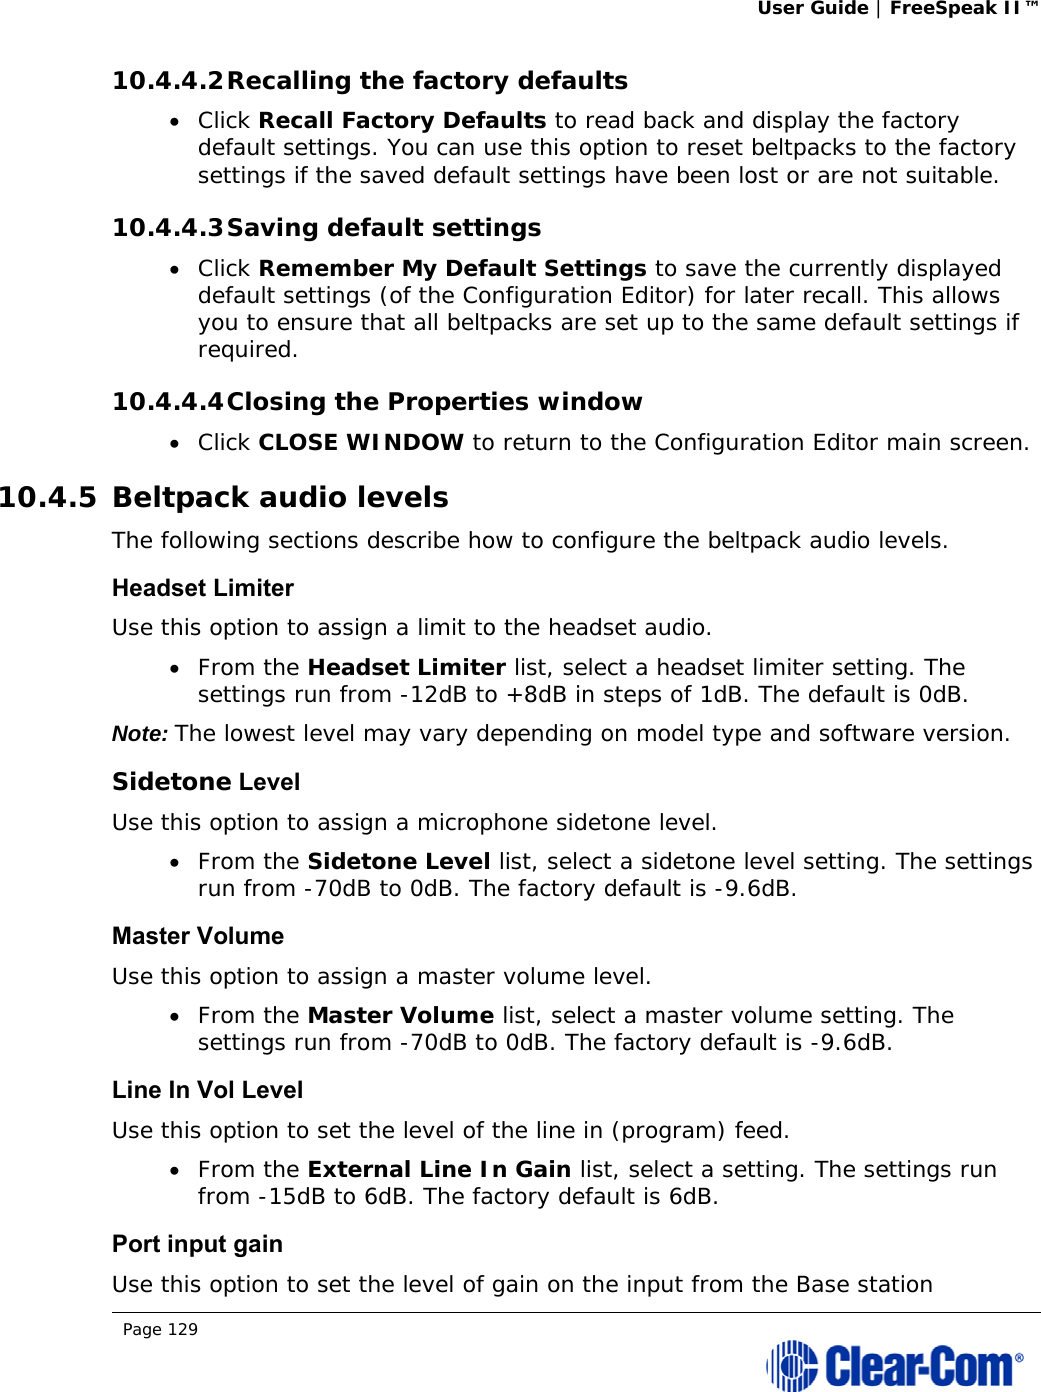 User Guide | FreeSpeak II™  Page 129  10.4.4.2 Recalling the factory defaults  Click Recall Factory Defaults to read back and display the factory default settings. You can use this option to reset beltpacks to the factory settings if the saved default settings have been lost or are not suitable. 10.4.4.3 Saving default settings  Click Remember My Default Settings to save the currently displayed default settings (of the Configuration Editor) for later recall. This allows you to ensure that all beltpacks are set up to the same default settings if required. 10.4.4.4 Closing the Properties window  Click CLOSE WINDOW to return to the Configuration Editor main screen. 10.4.5 Beltpack audio levels The following sections describe how to configure the beltpack audio levels. Headset Limiter Use this option to assign a limit to the headset audio.  From the Headset Limiter list, select a headset limiter setting. The settings run from -12dB to +8dB in steps of 1dB. The default is 0dB. Note: The lowest level may vary depending on model type and software version. Sidetone Level Use this option to assign a microphone sidetone level.  From the Sidetone Level list, select a sidetone level setting. The settings run from -70dB to 0dB. The factory default is -9.6dB. Master Volume Use this option to assign a master volume level.  From the Master Volume list, select a master volume setting. The settings run from -70dB to 0dB. The factory default is -9.6dB. Line In Vol Level Use this option to set the level of the line in (program) feed.  From the External Line In Gain list, select a setting. The settings run from -15dB to 6dB. The factory default is 6dB. Port input gain Use this option to set the level of gain on the input from the Base station 